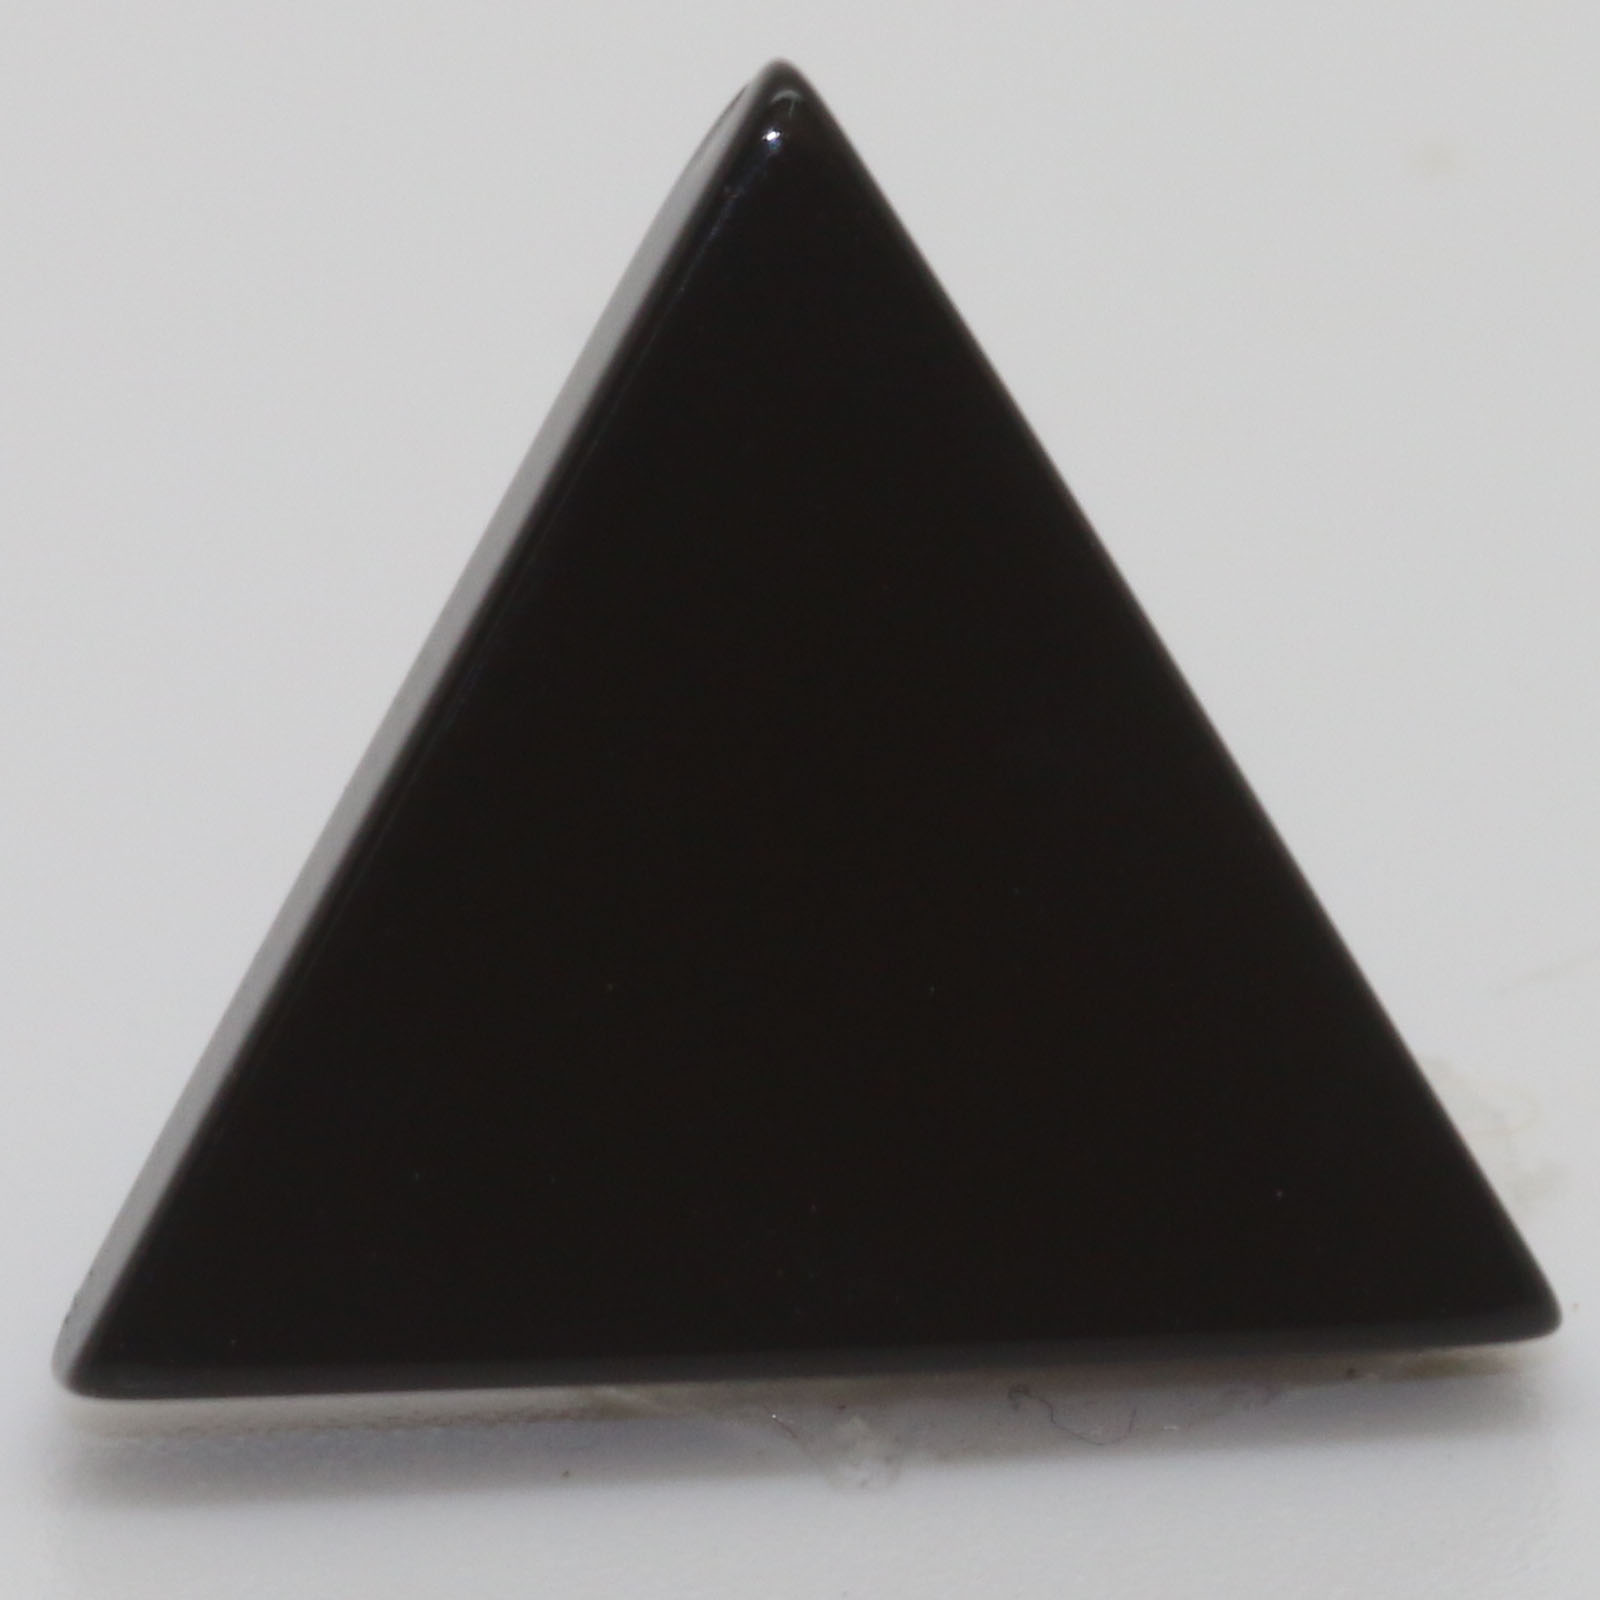 8X8 TRIANGLE SIGNET ONYX FACETED